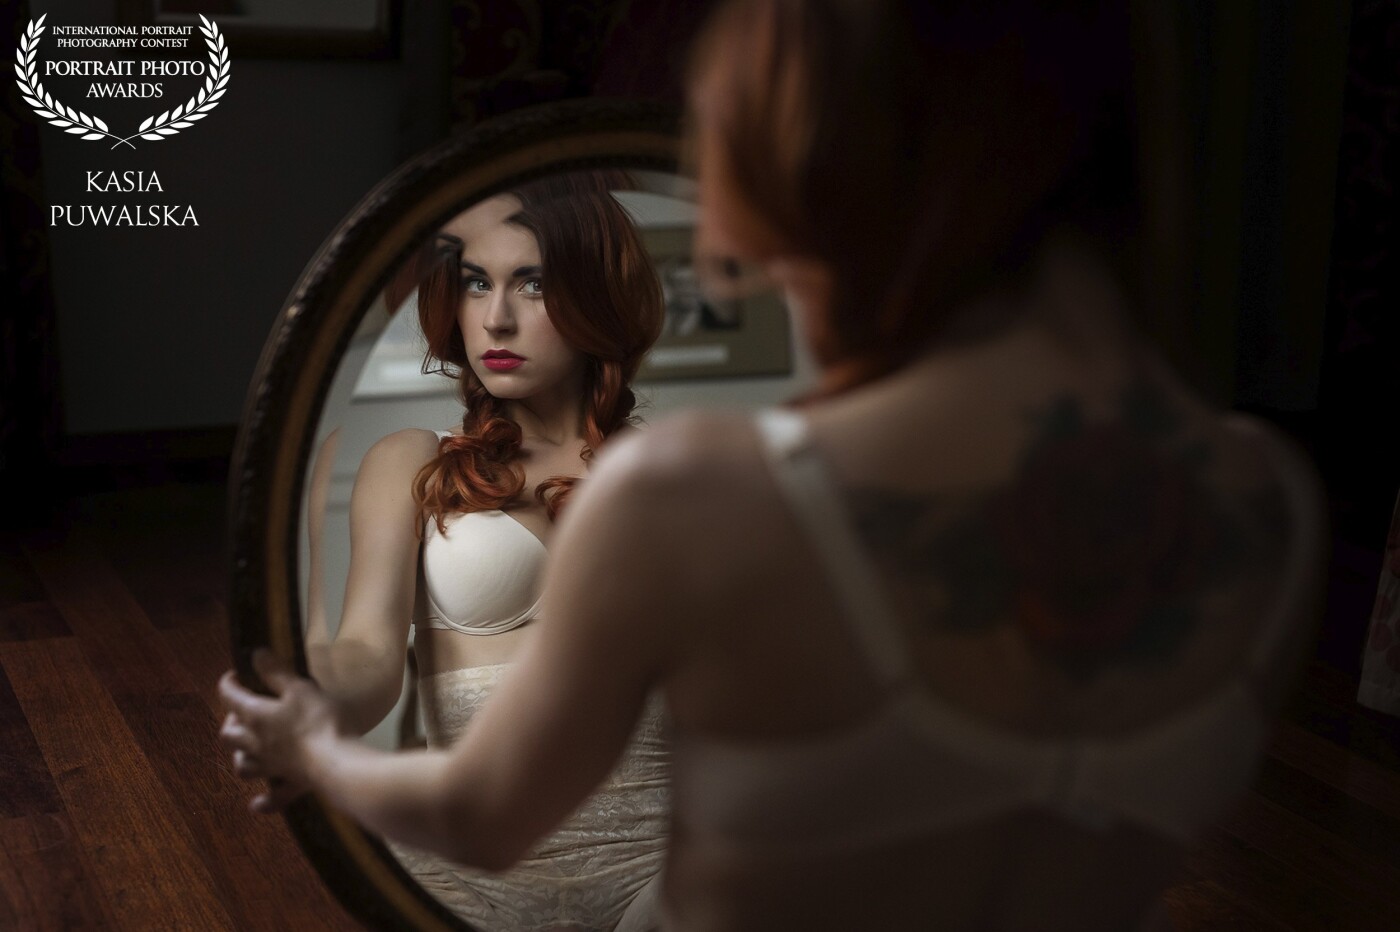 A portrait of beautiful red hair polish girl and her reflection in a mirror in natural light.